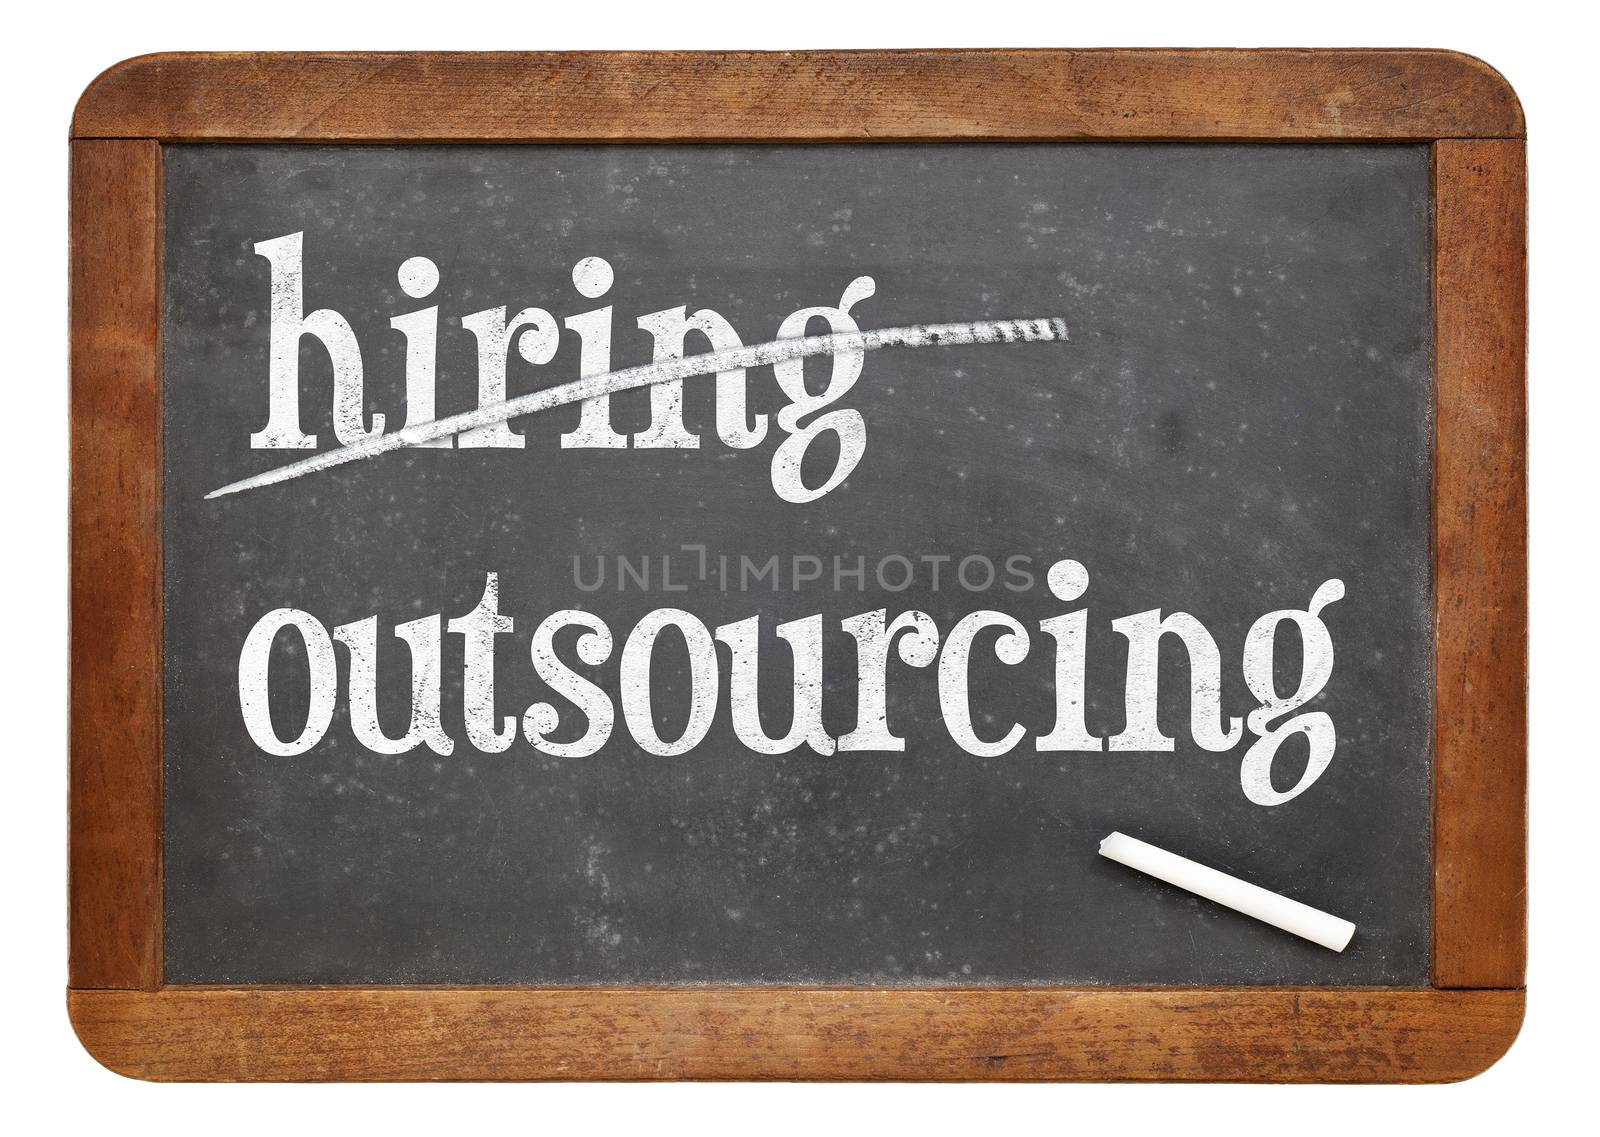 outsourcing instead of hiring concept - white chalk text on a vintage slate blackboard